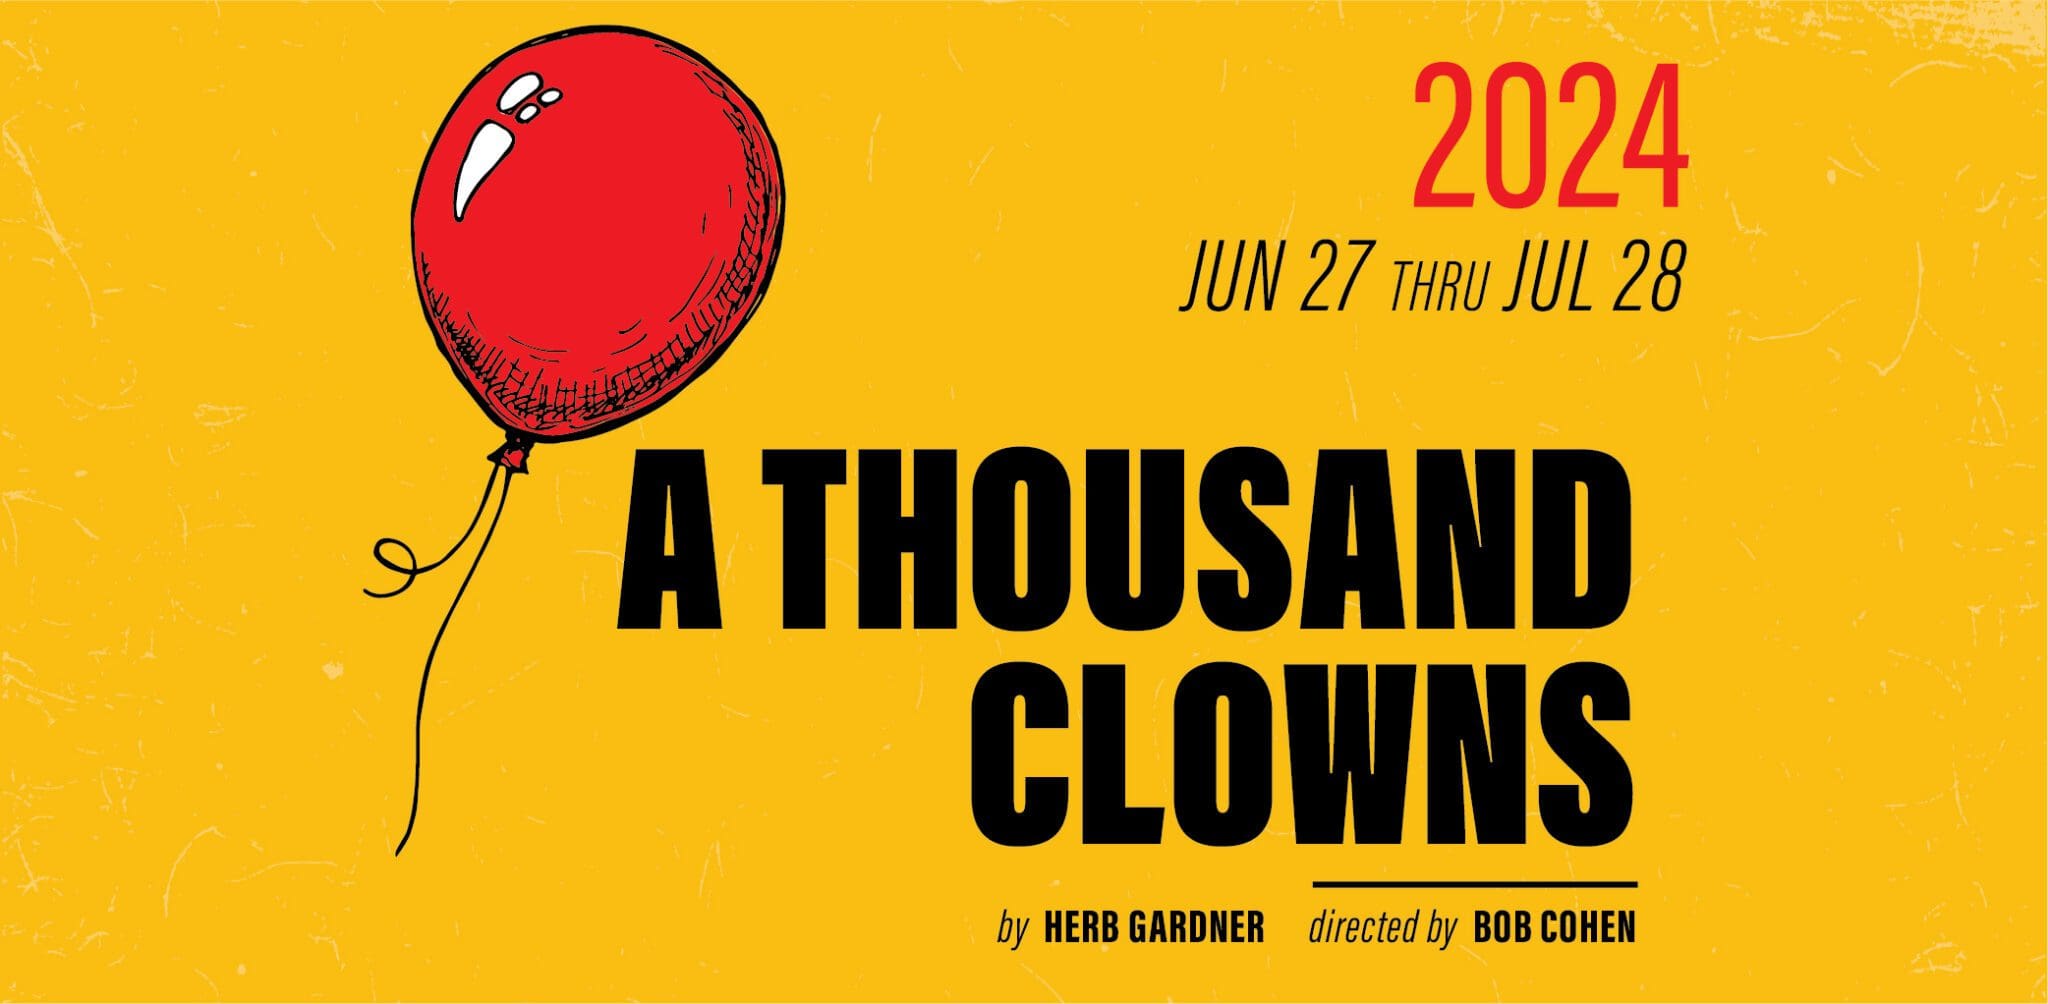 A THOUSAND CLOWNS by Herb Gardner; directed by Bob Cohen